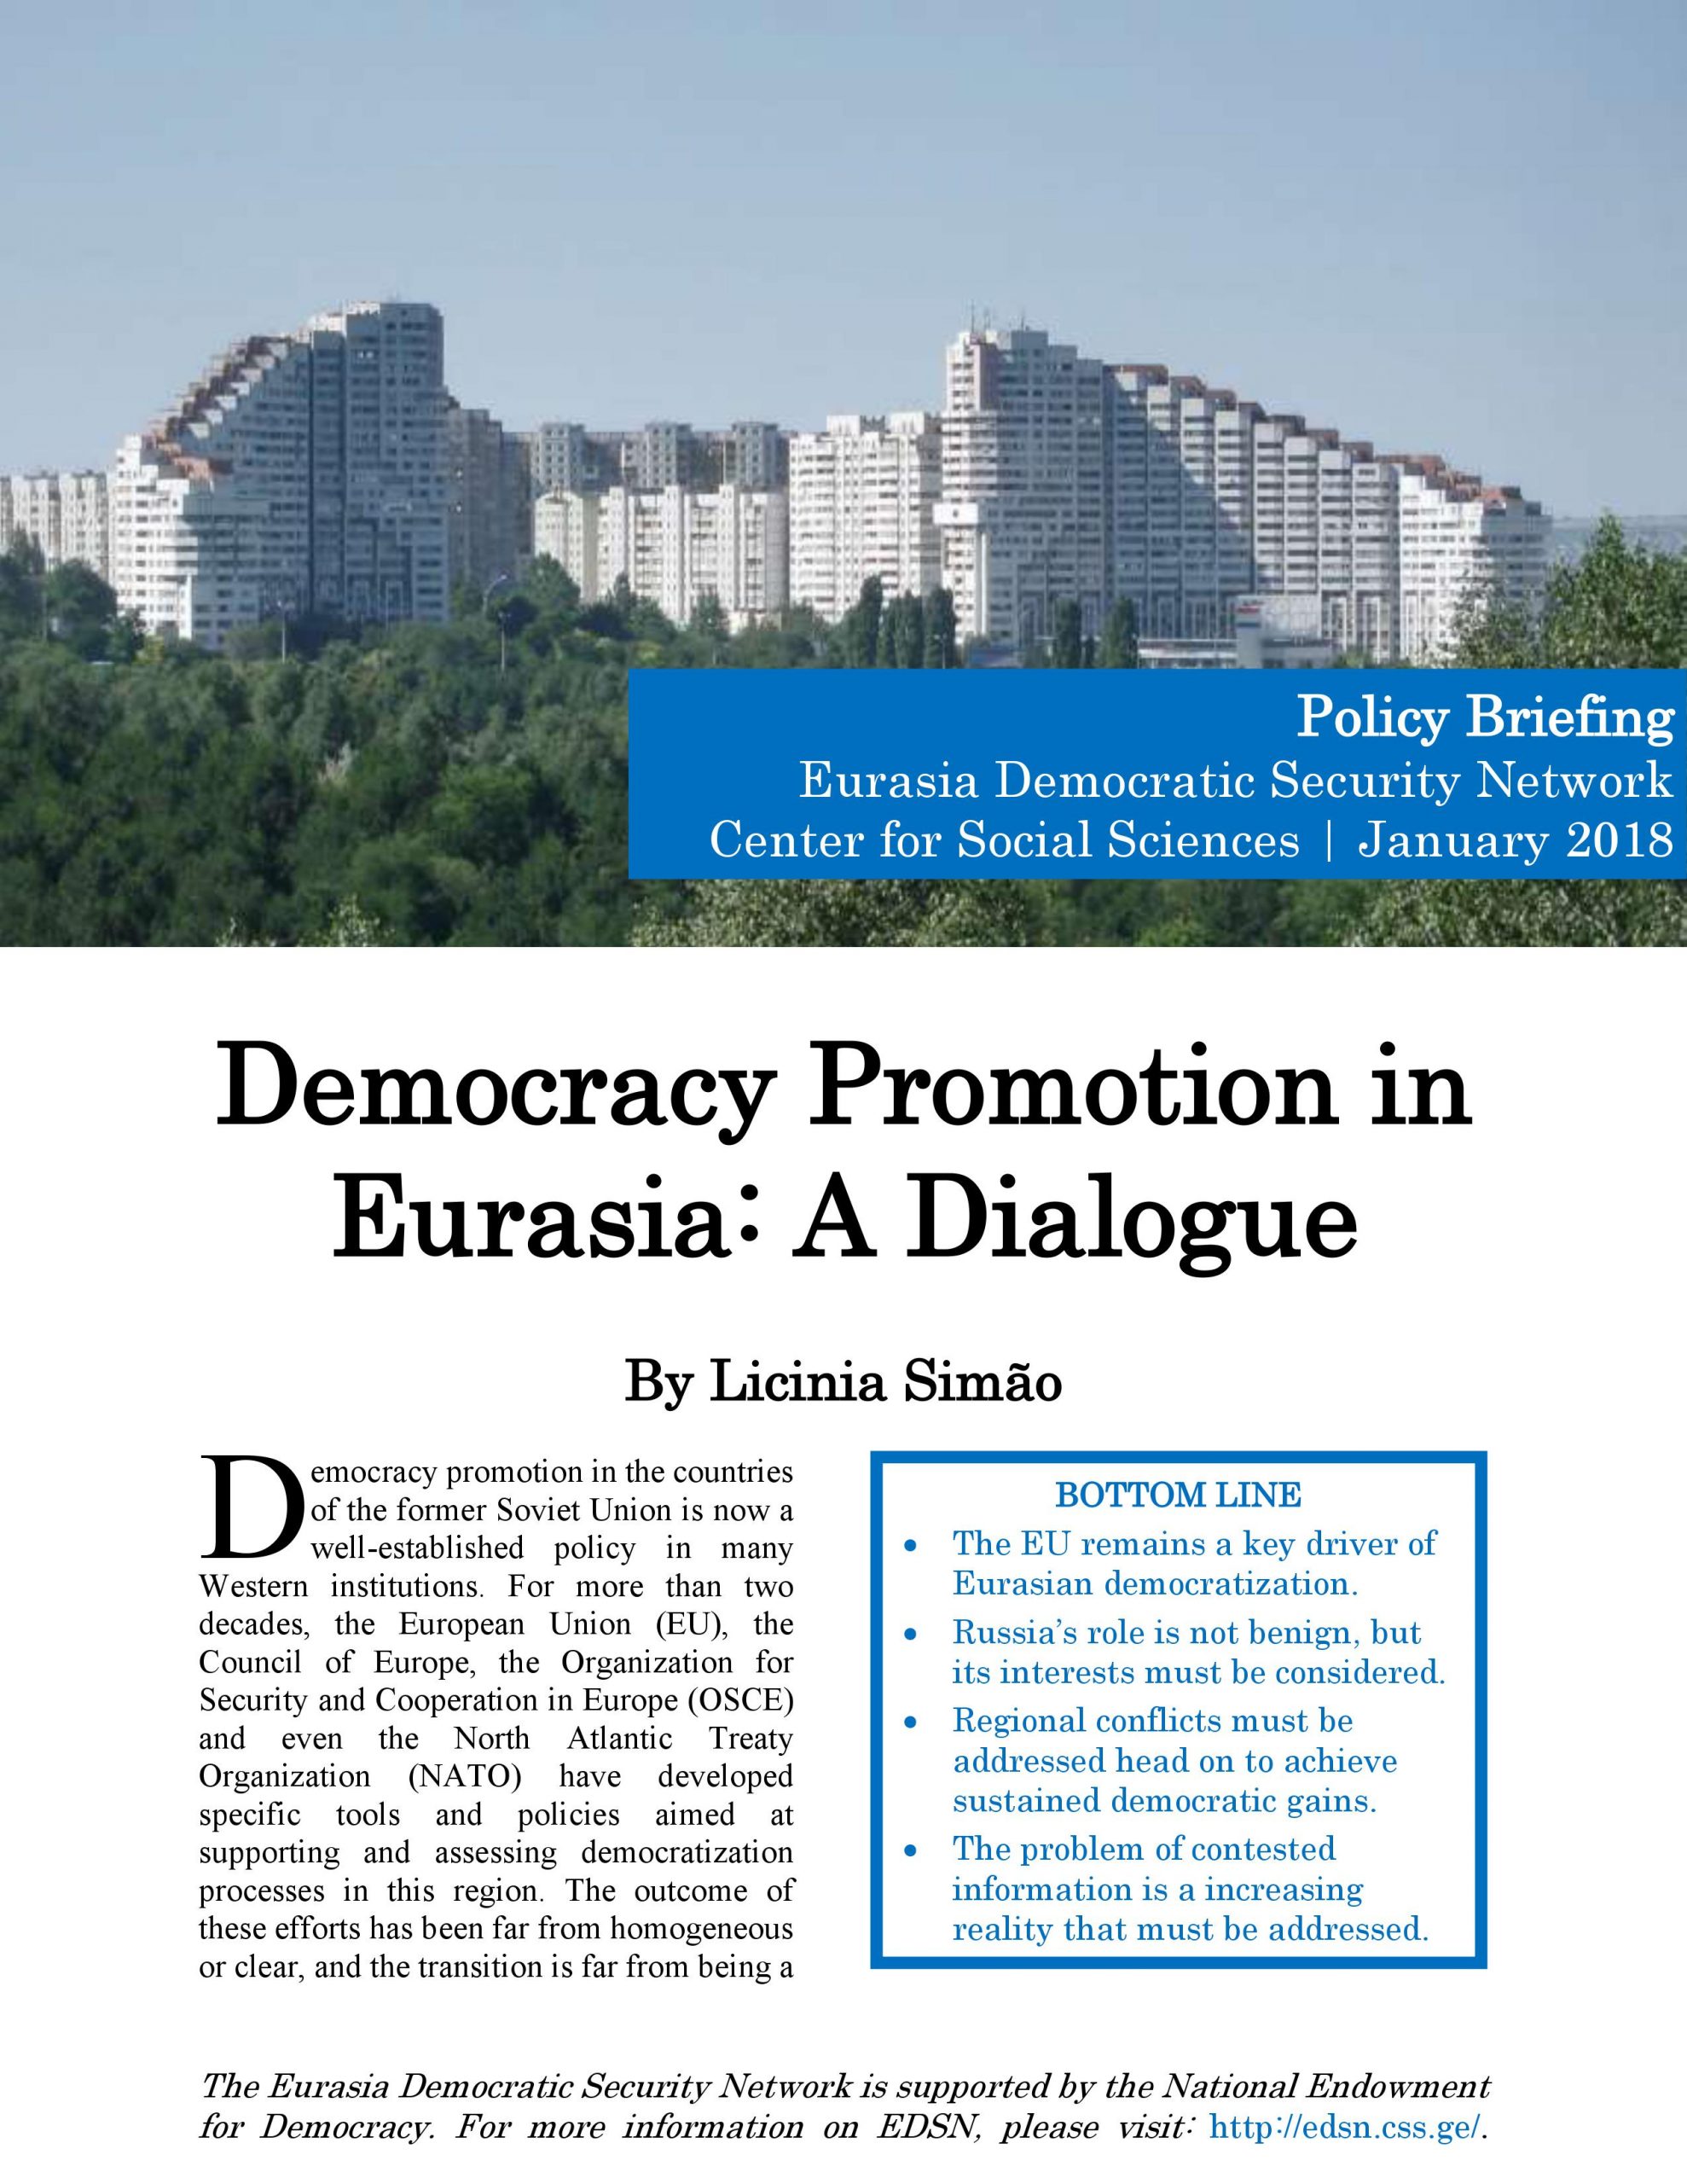 POLICY BRIEFING: Democracy Promotion in Eurasia — A Dialogue